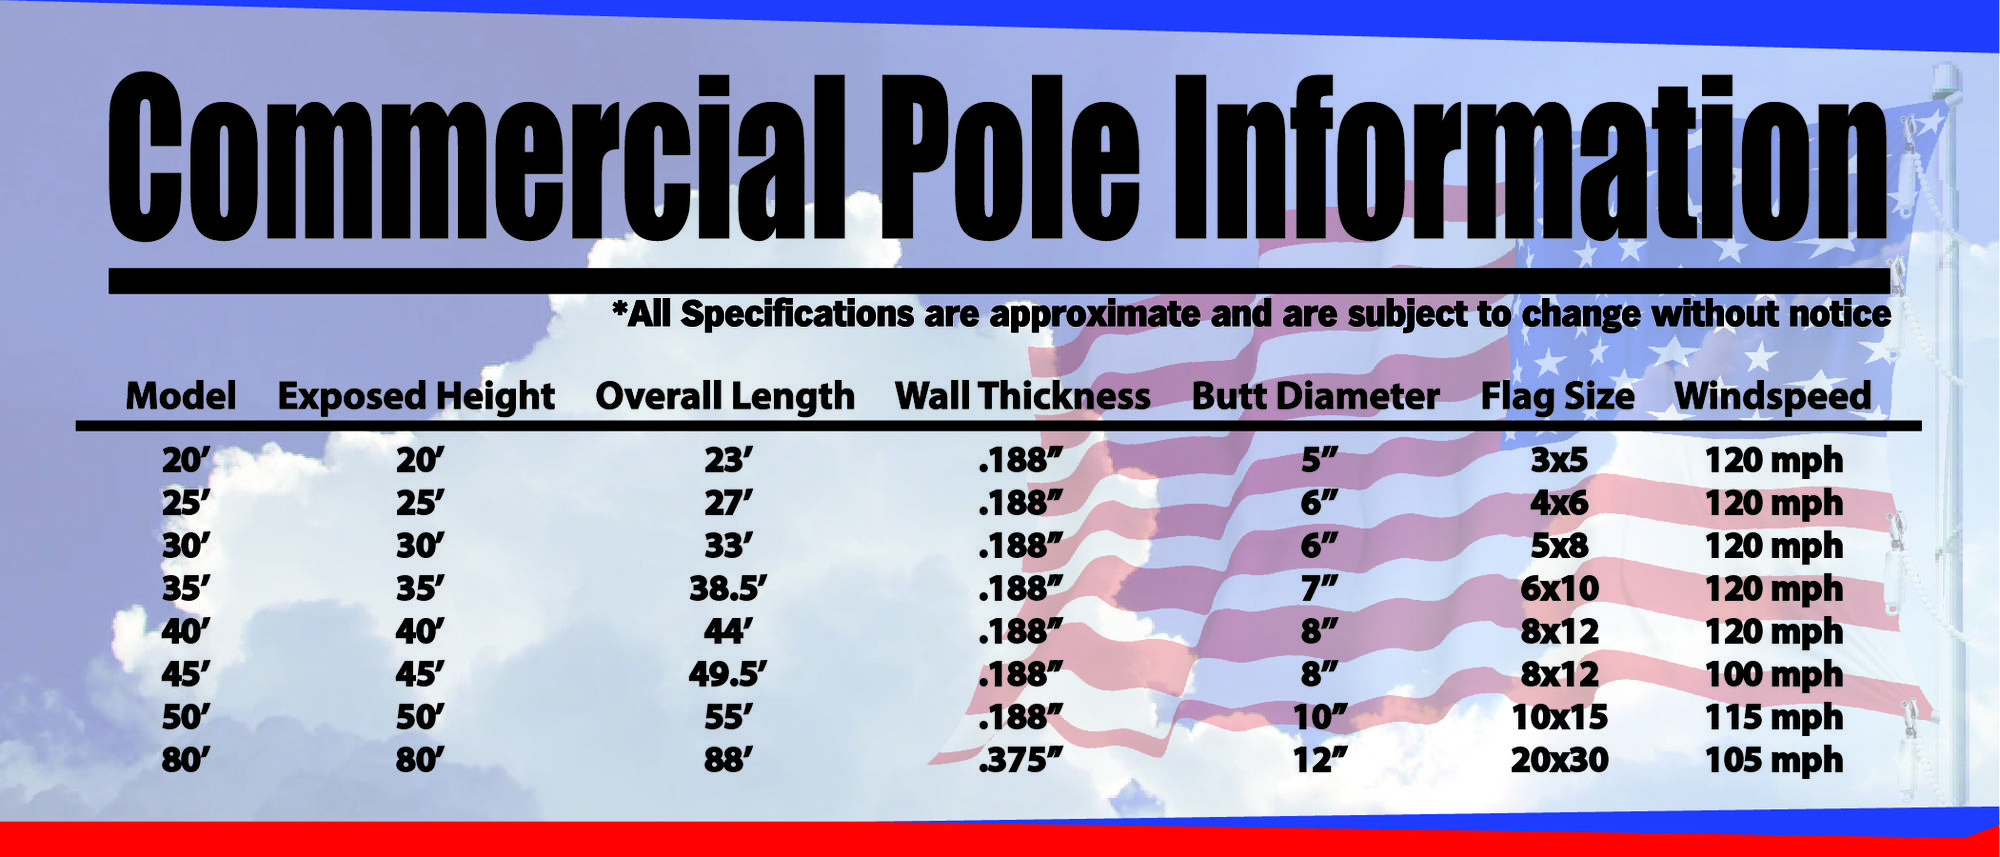 A chart with information on commercial flagpoles.